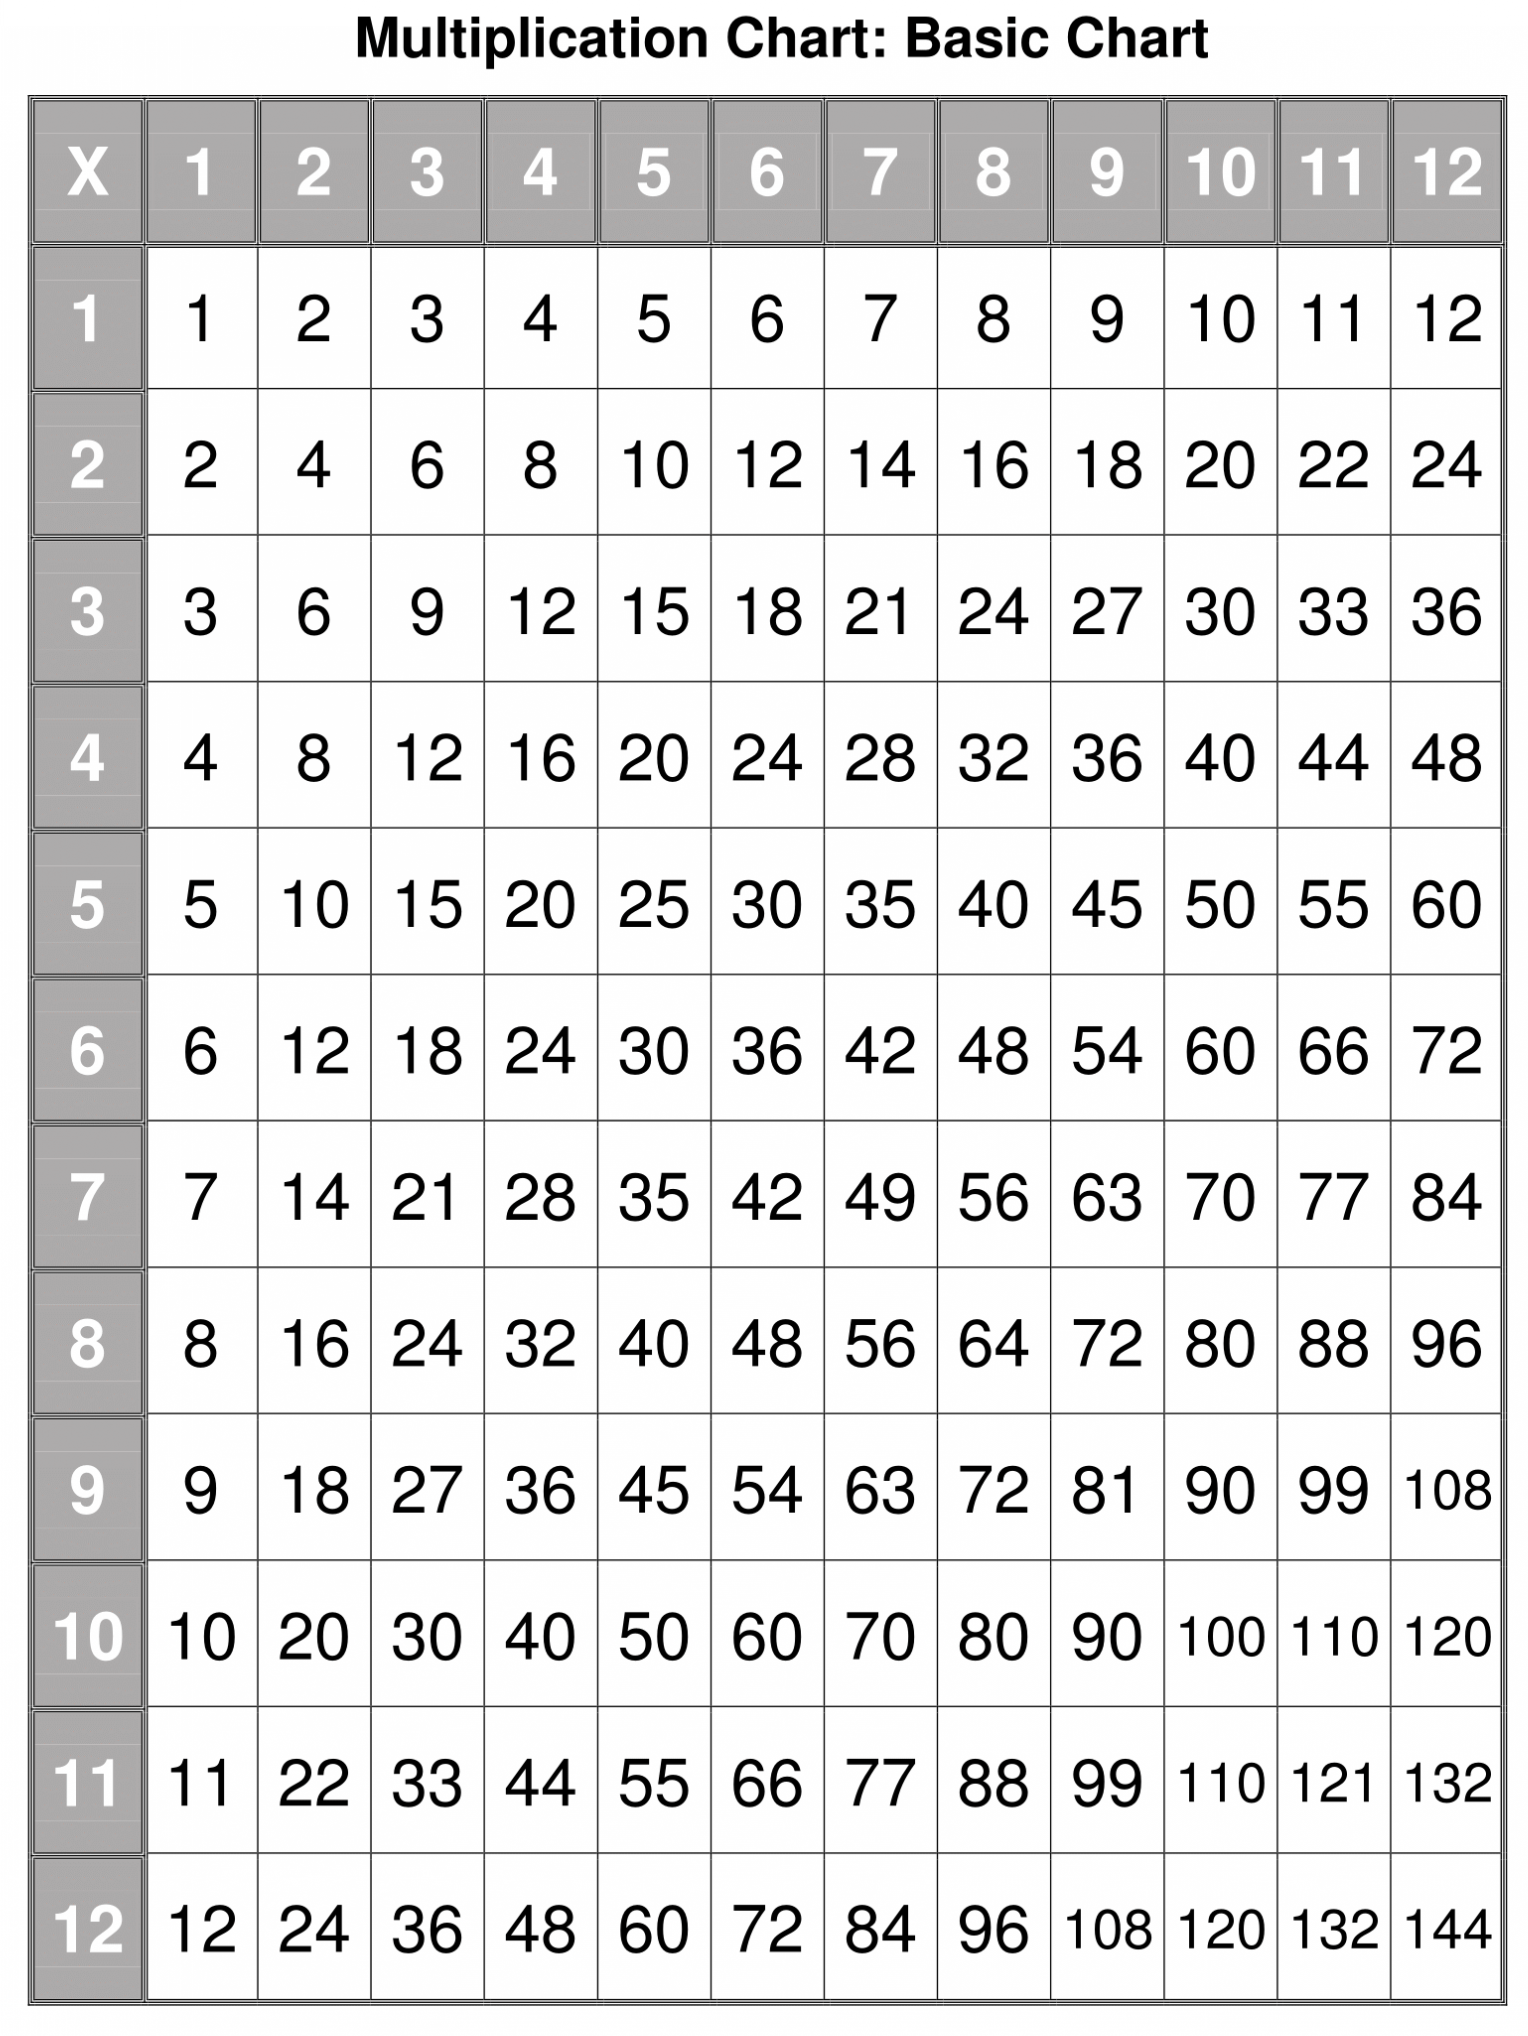 multiplication-chart-of-12-printable-multiplication-flash-cards